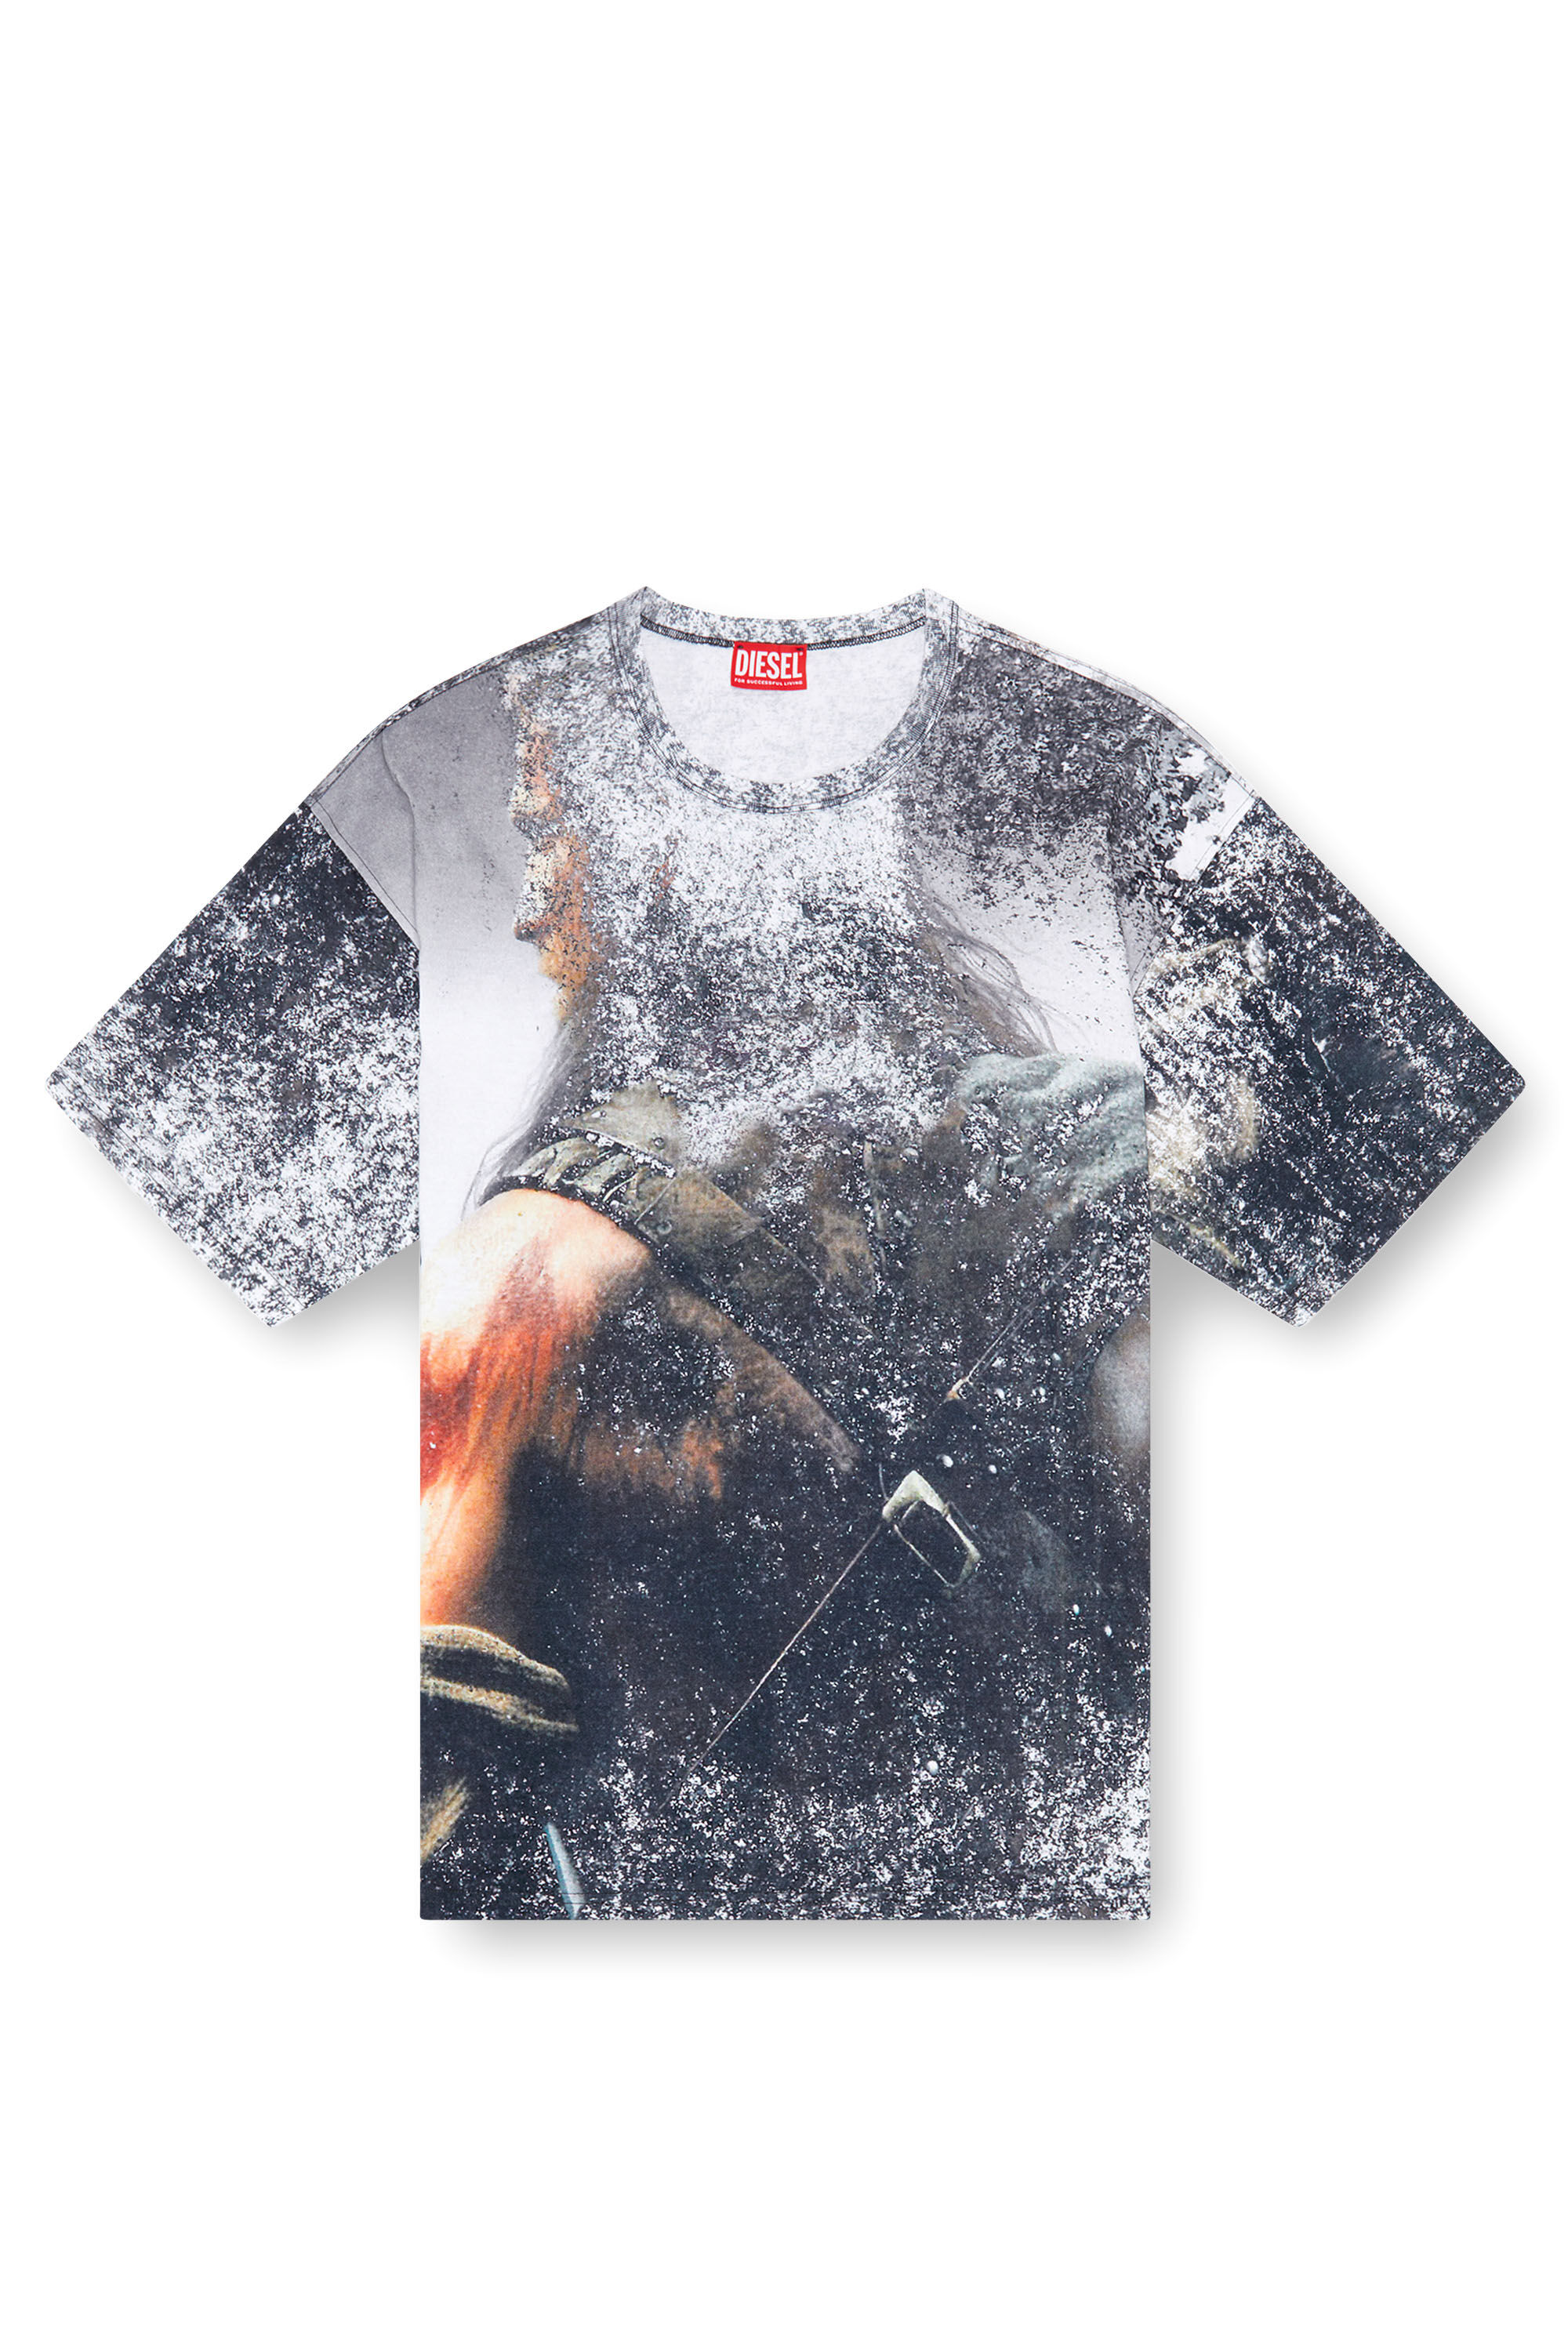 Diesel - T-BOXT-Q21, Male T-shirt with movie poster print in ブラック - Image 2